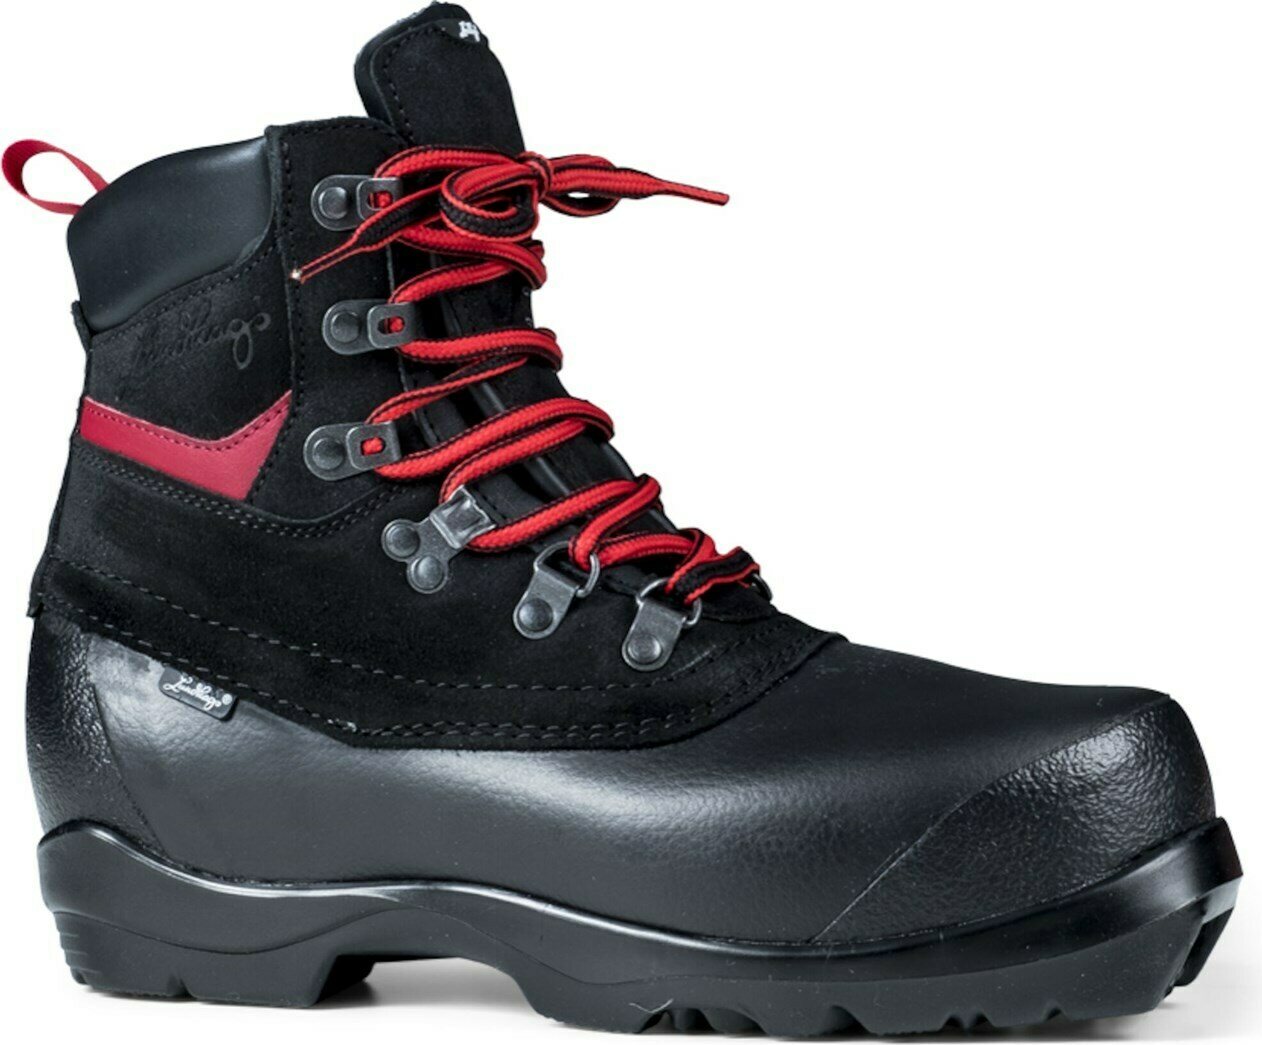 Lundhags Guide BC (NNN-BC) | Backcountry Ski Boots Varuste.net